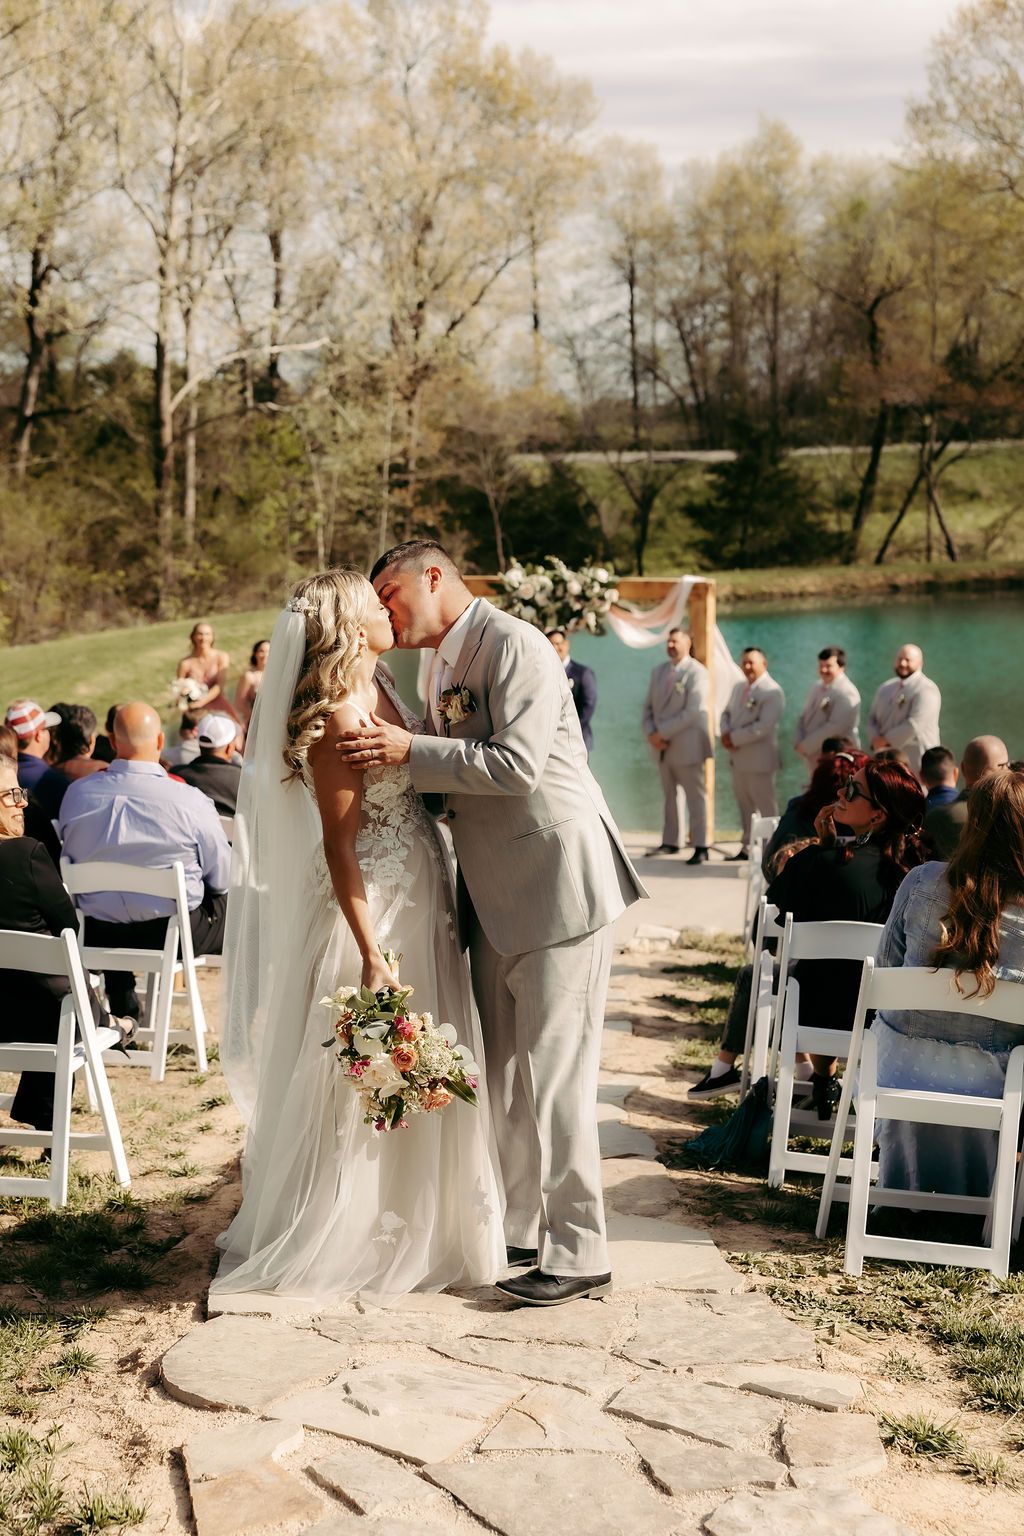 Toast to the Best Night of Your Life at the Champagne Barn in Harrisburg, MO. Plan Your Wedding Today